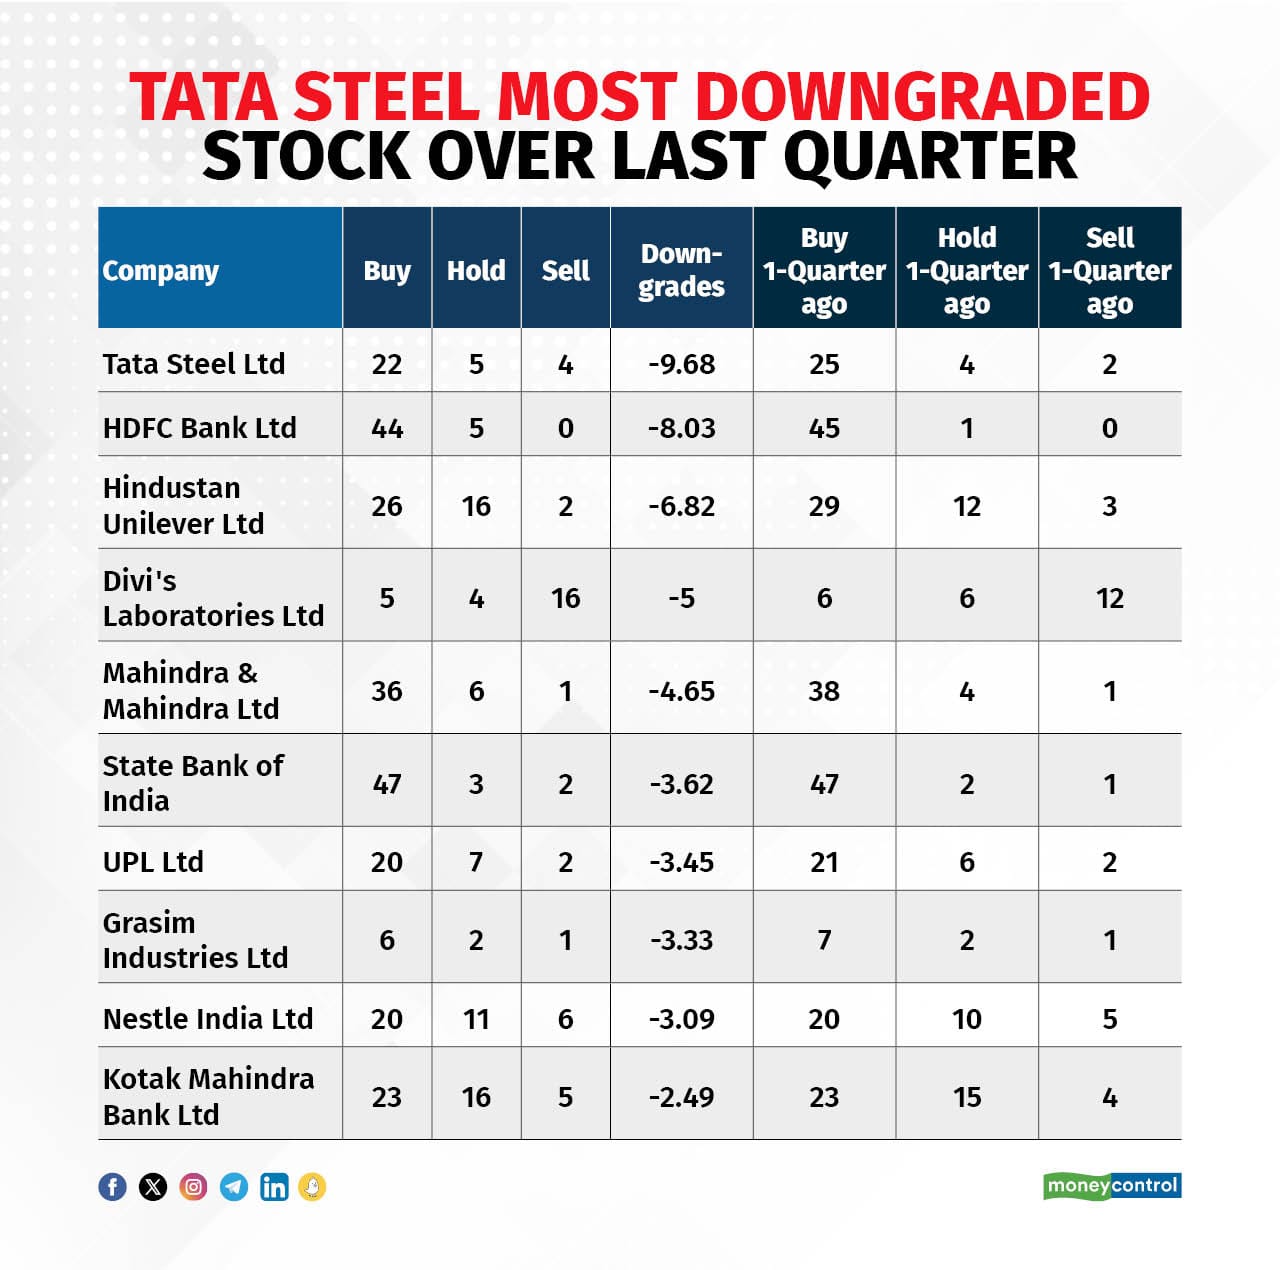 Tata Steel aims to complete Kalinganagar project expansion, begin